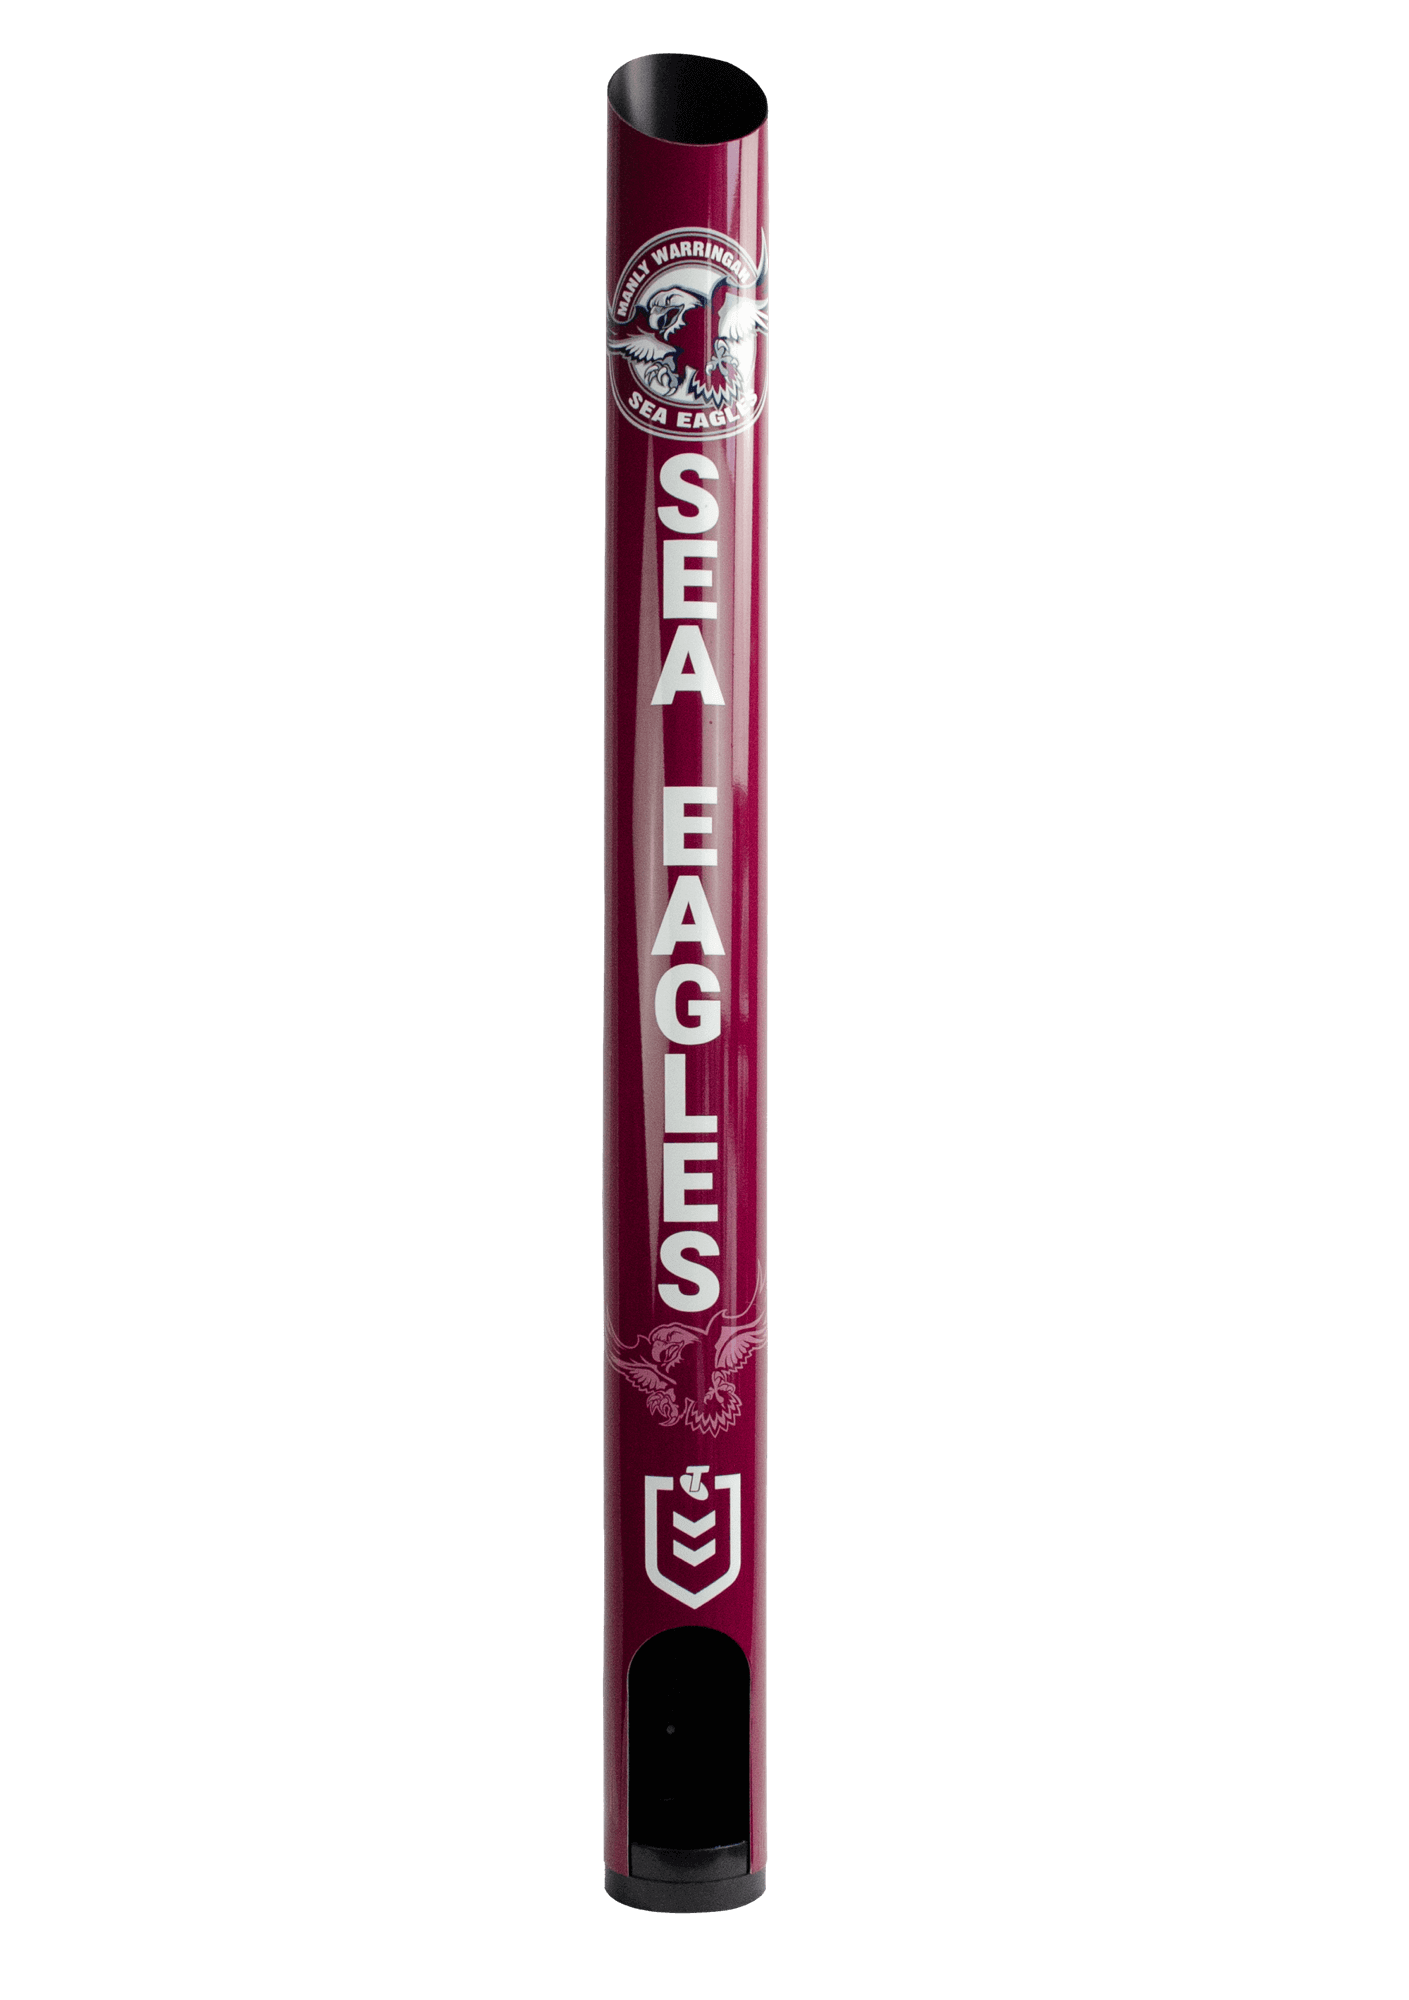 MANLY SEA EAGLES NRL DISPENSER _MANLY SEA EAGLES_STUBBY CLUB